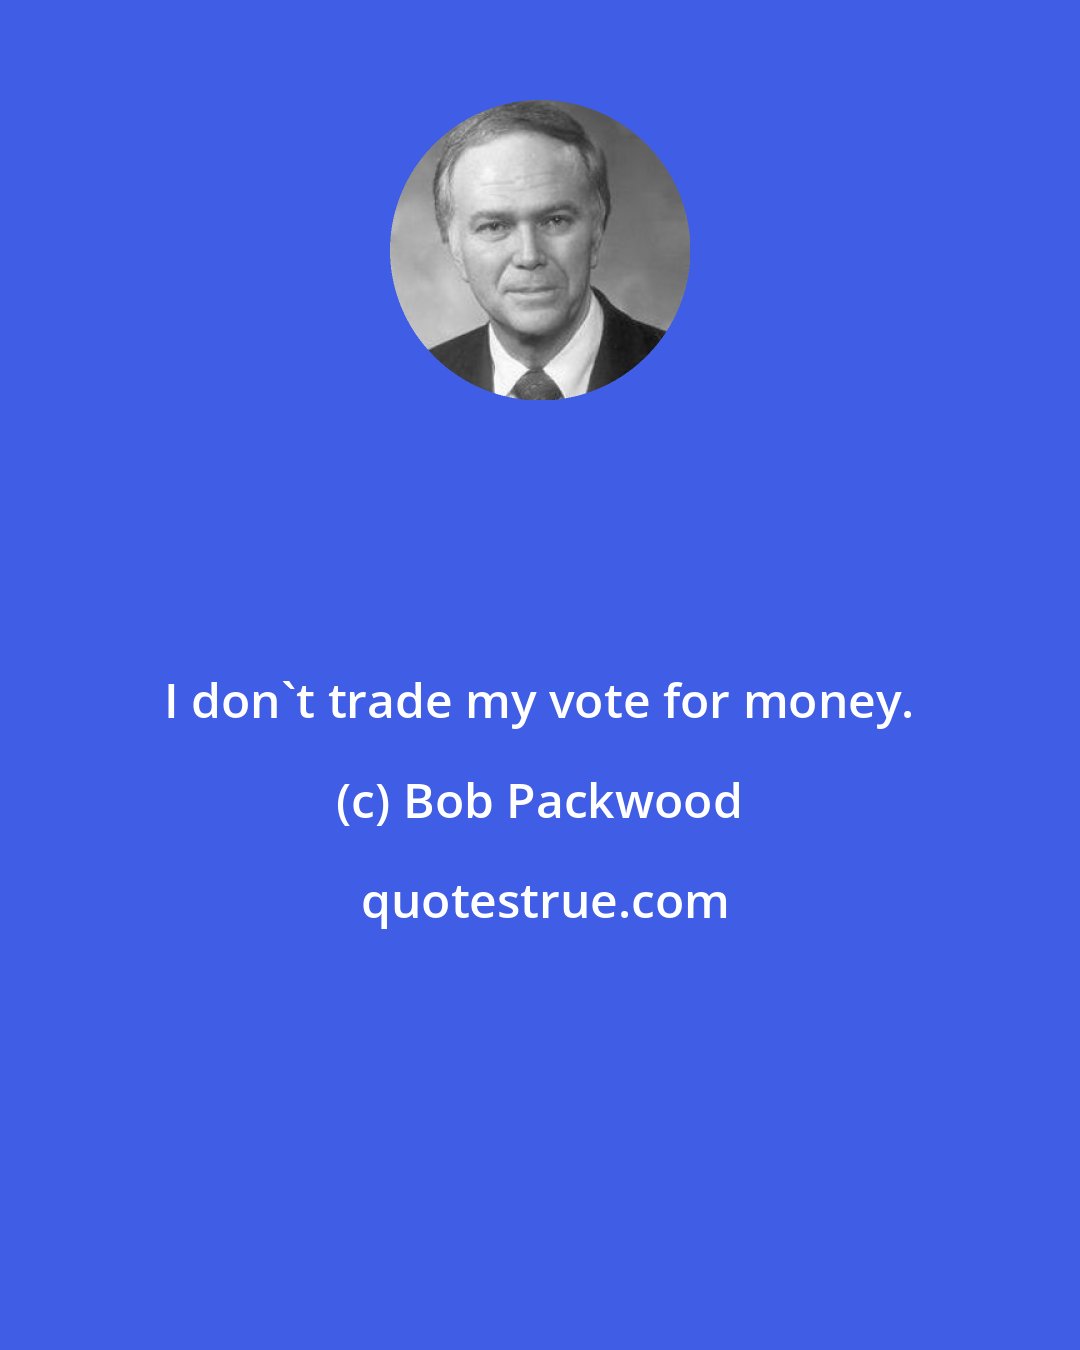 Bob Packwood: I don't trade my vote for money.